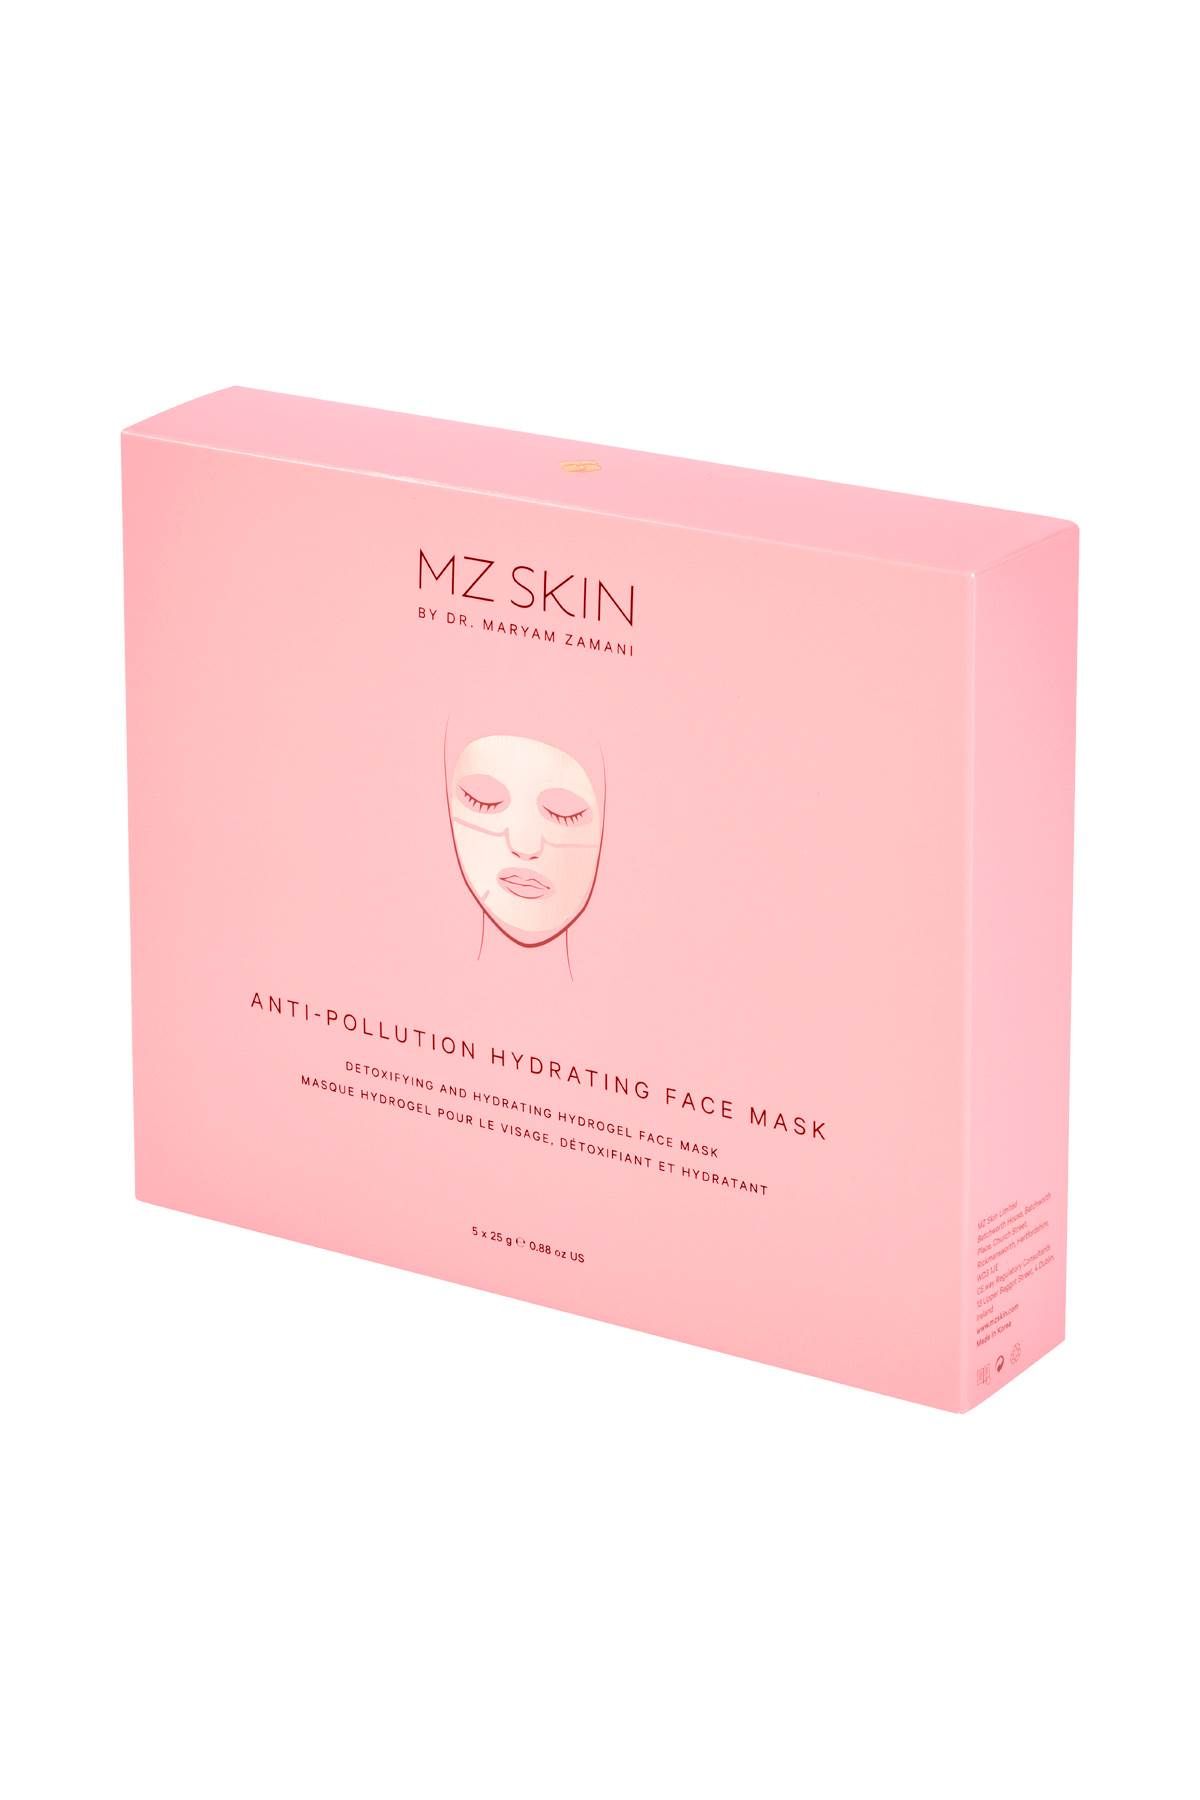 MZ SKIN anti-pollution hydrating face mask